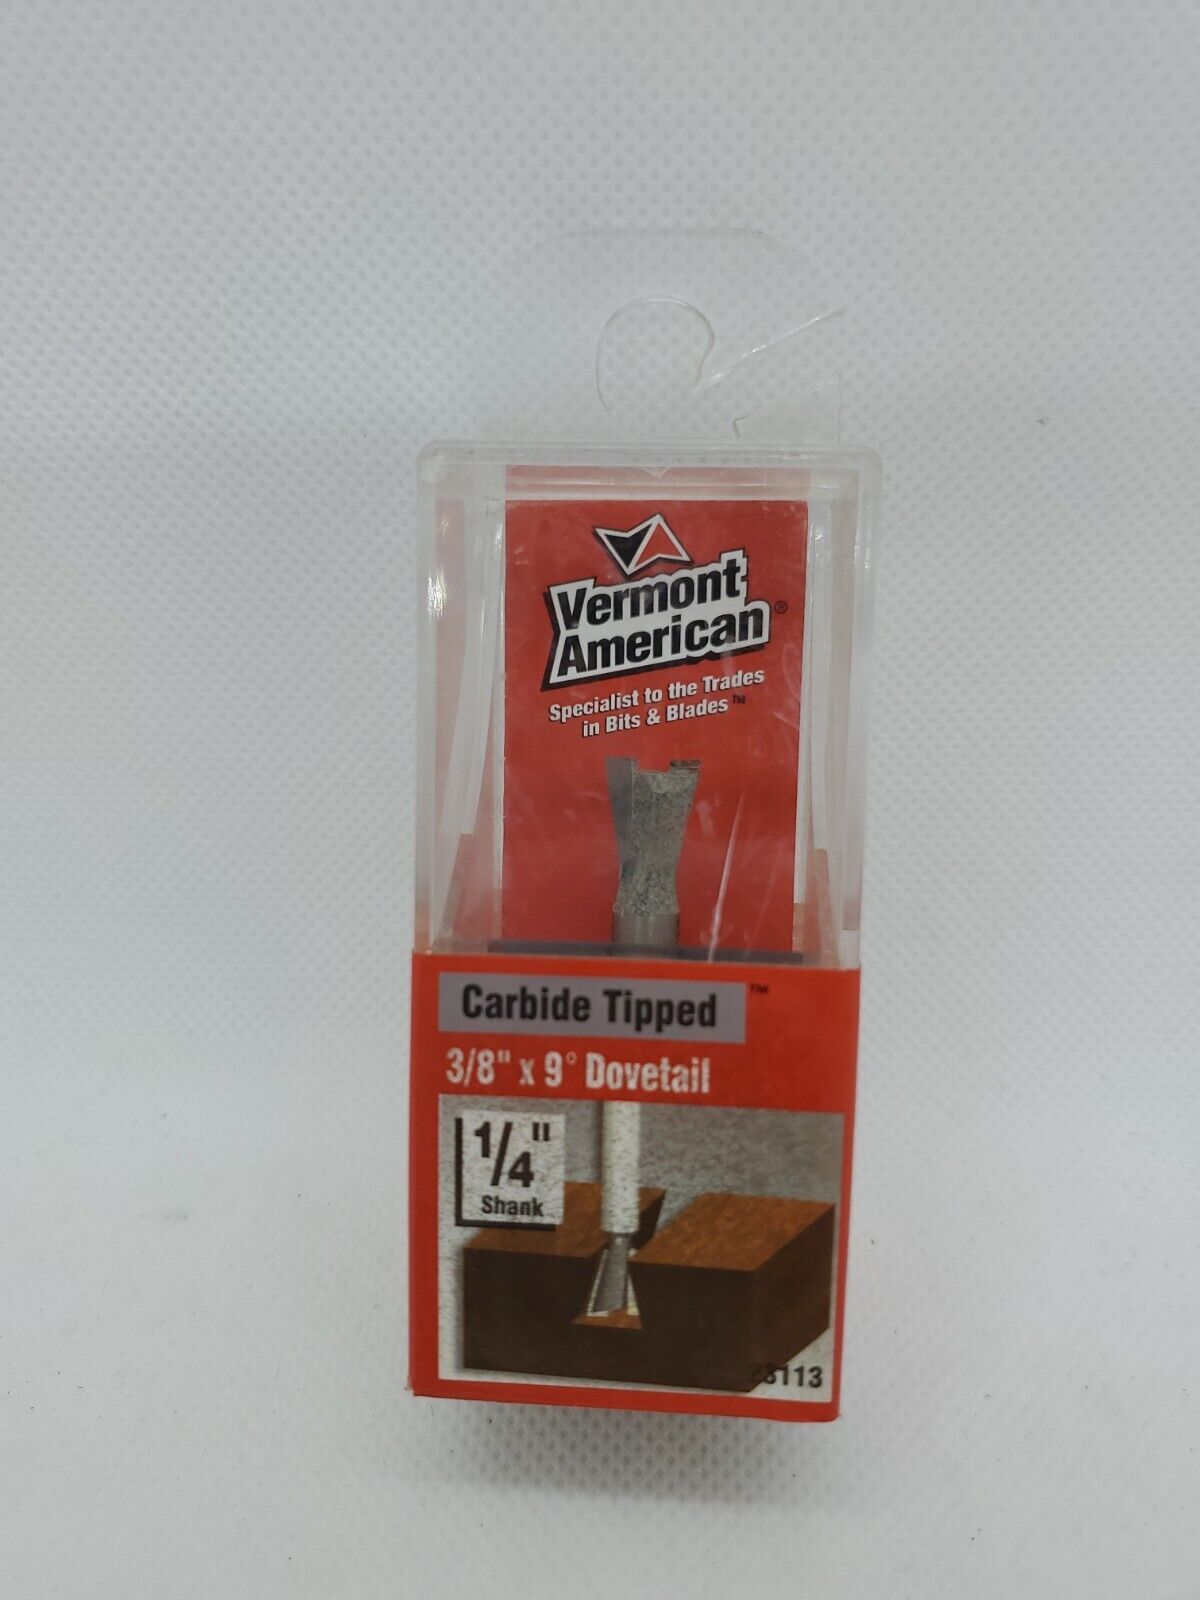 Vermont American 3/8" x 9⁰ Dovetail Router Bit Carbide tipped NOS 23113 - $8.91